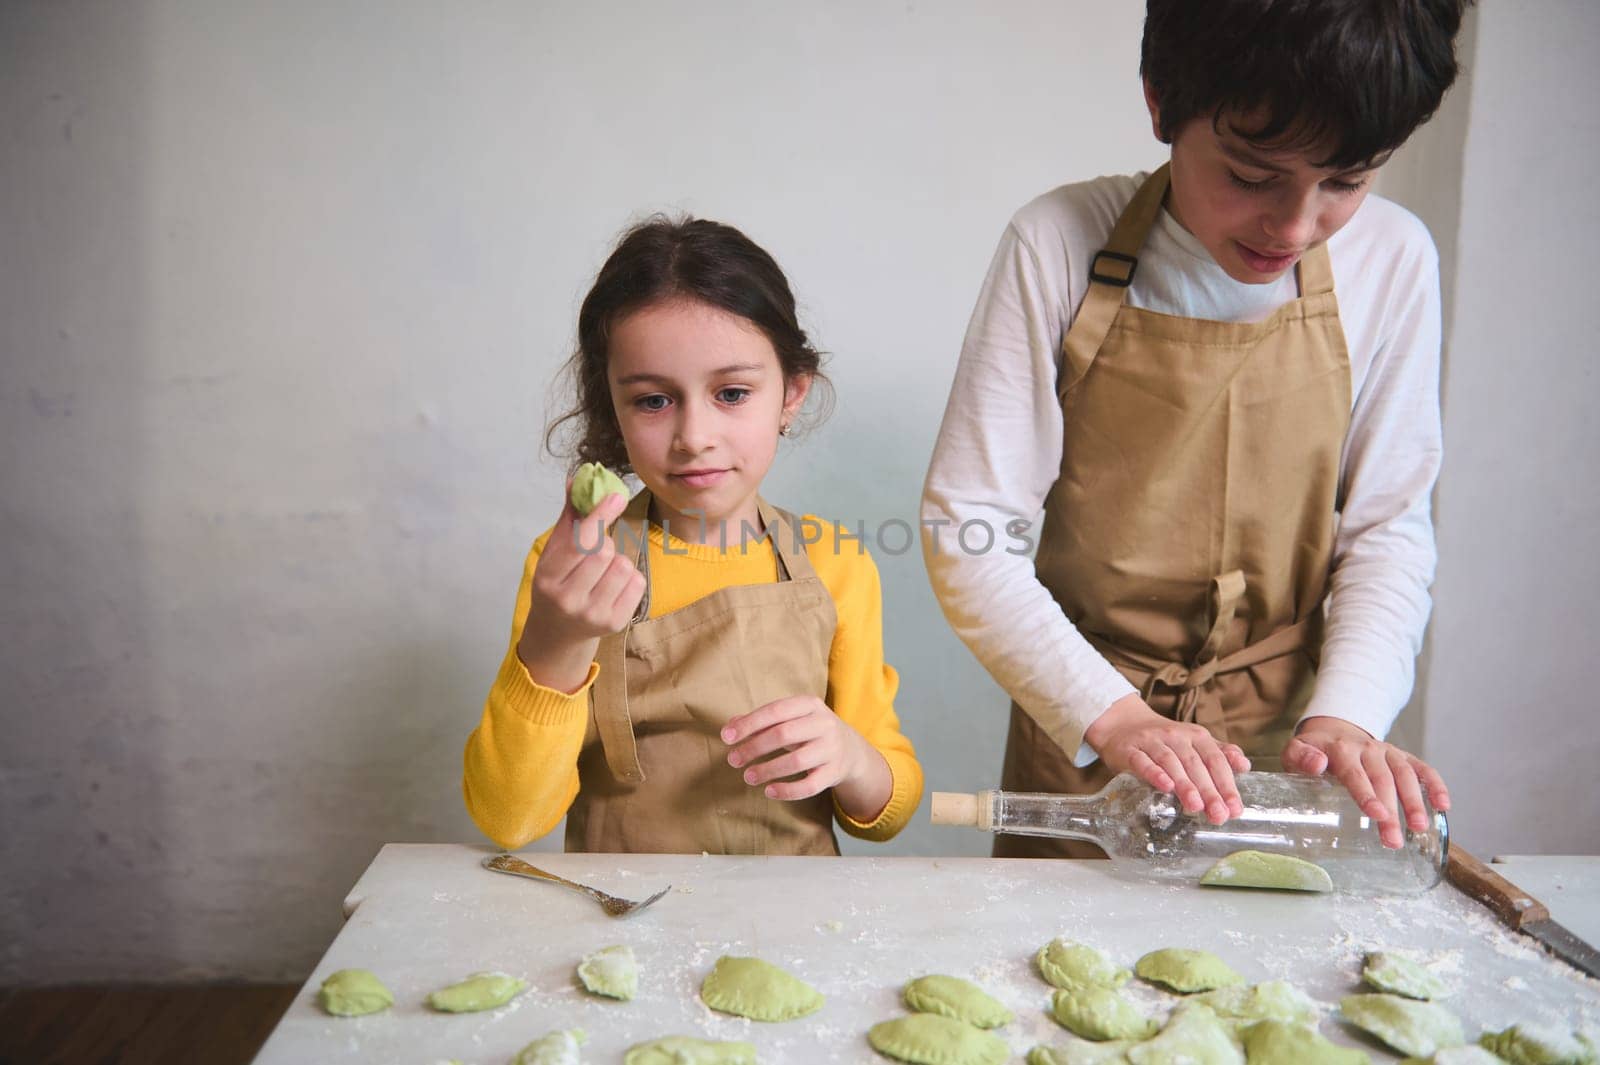 Lovely little girl stuffing and molding dough while her brother using wine bottle as rolling pin, rolling out a raw green dough. Kids making ravioli, varennyki, pelmeni against white wall background